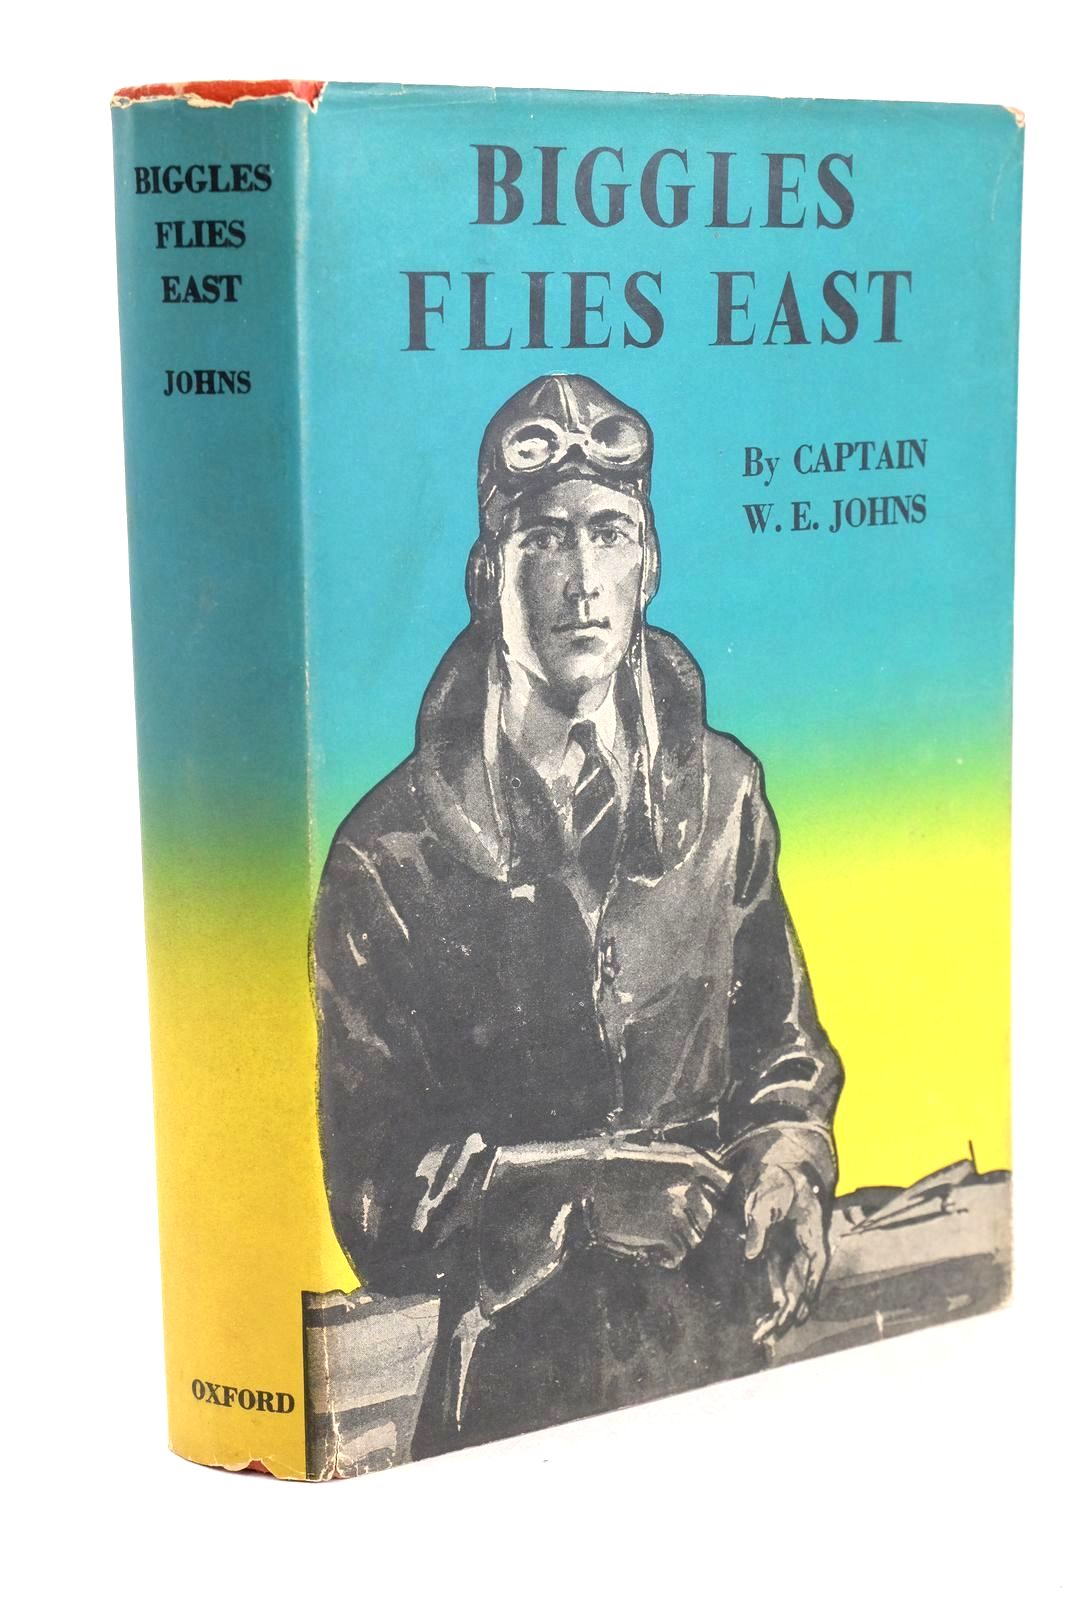 Photo of BIGGLES FLIES EAST written by Johns, W.E. published by Oxford University Press, Geoffrey Cumberlege (STOCK CODE: 1326066)  for sale by Stella & Rose's Books